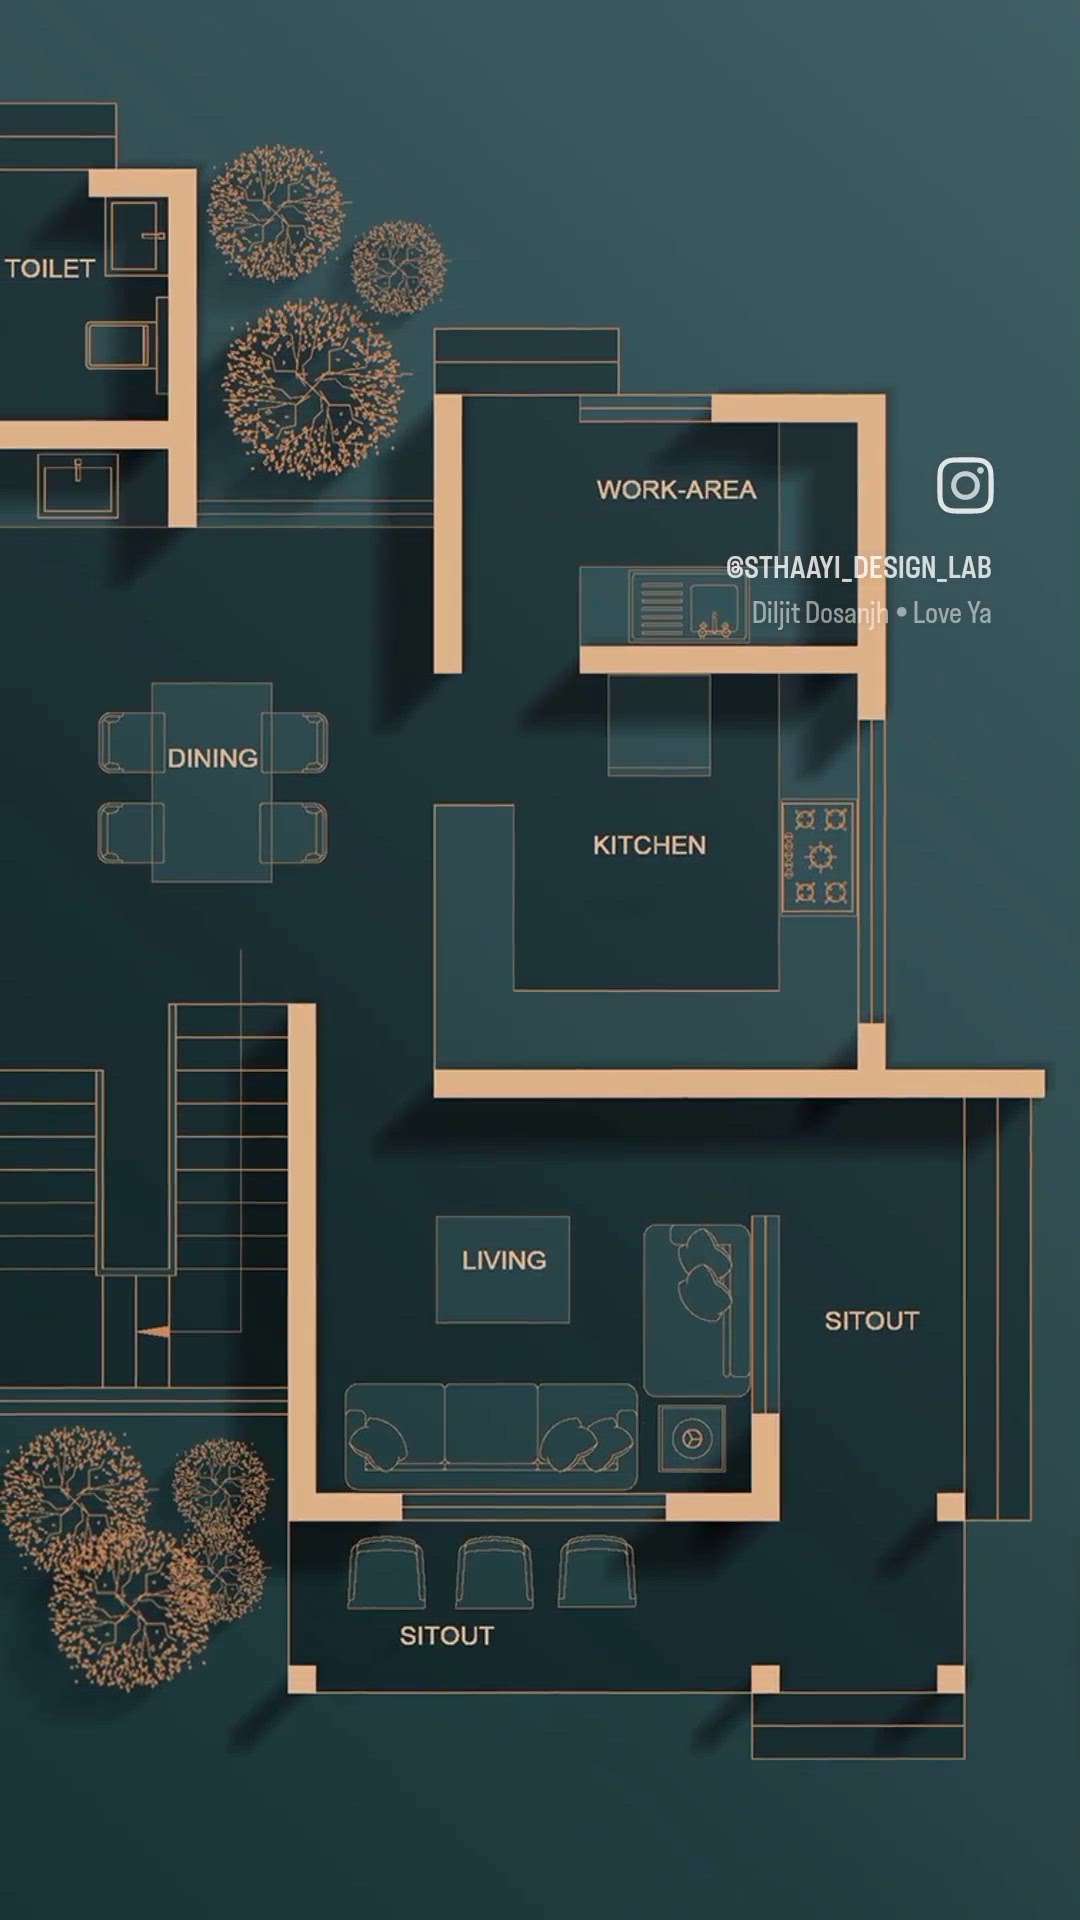 Beautiful Kerala Home Plan and Exterior 🏡 | 4BHK |Area : 1818 sq.ft |
Design: @sthaayi_design_lab 

Ground Floor 
● Sitout 
● Living 
● Dining 
● 1Master Bedroom attached 
● 2nd Bedroom attached 
● Kitchen 
● Work area 
● C-Toilet [out-door]
● Stair
First Floor
● 3rd Bedroom attached
● 4th Bedroom attached 
● Upper Living
● Balcony 
.
.
.
#sthaayi_design_lab #sthaayi 
#floorplan | #architecture | #architecturaldesign | #housedesign | #buildingdesign | #designhouse | #designerhouse | #interiordesign | #construction | #newconstruction | #civilengineering | #realestate #kerala #budgethome #keralahomes